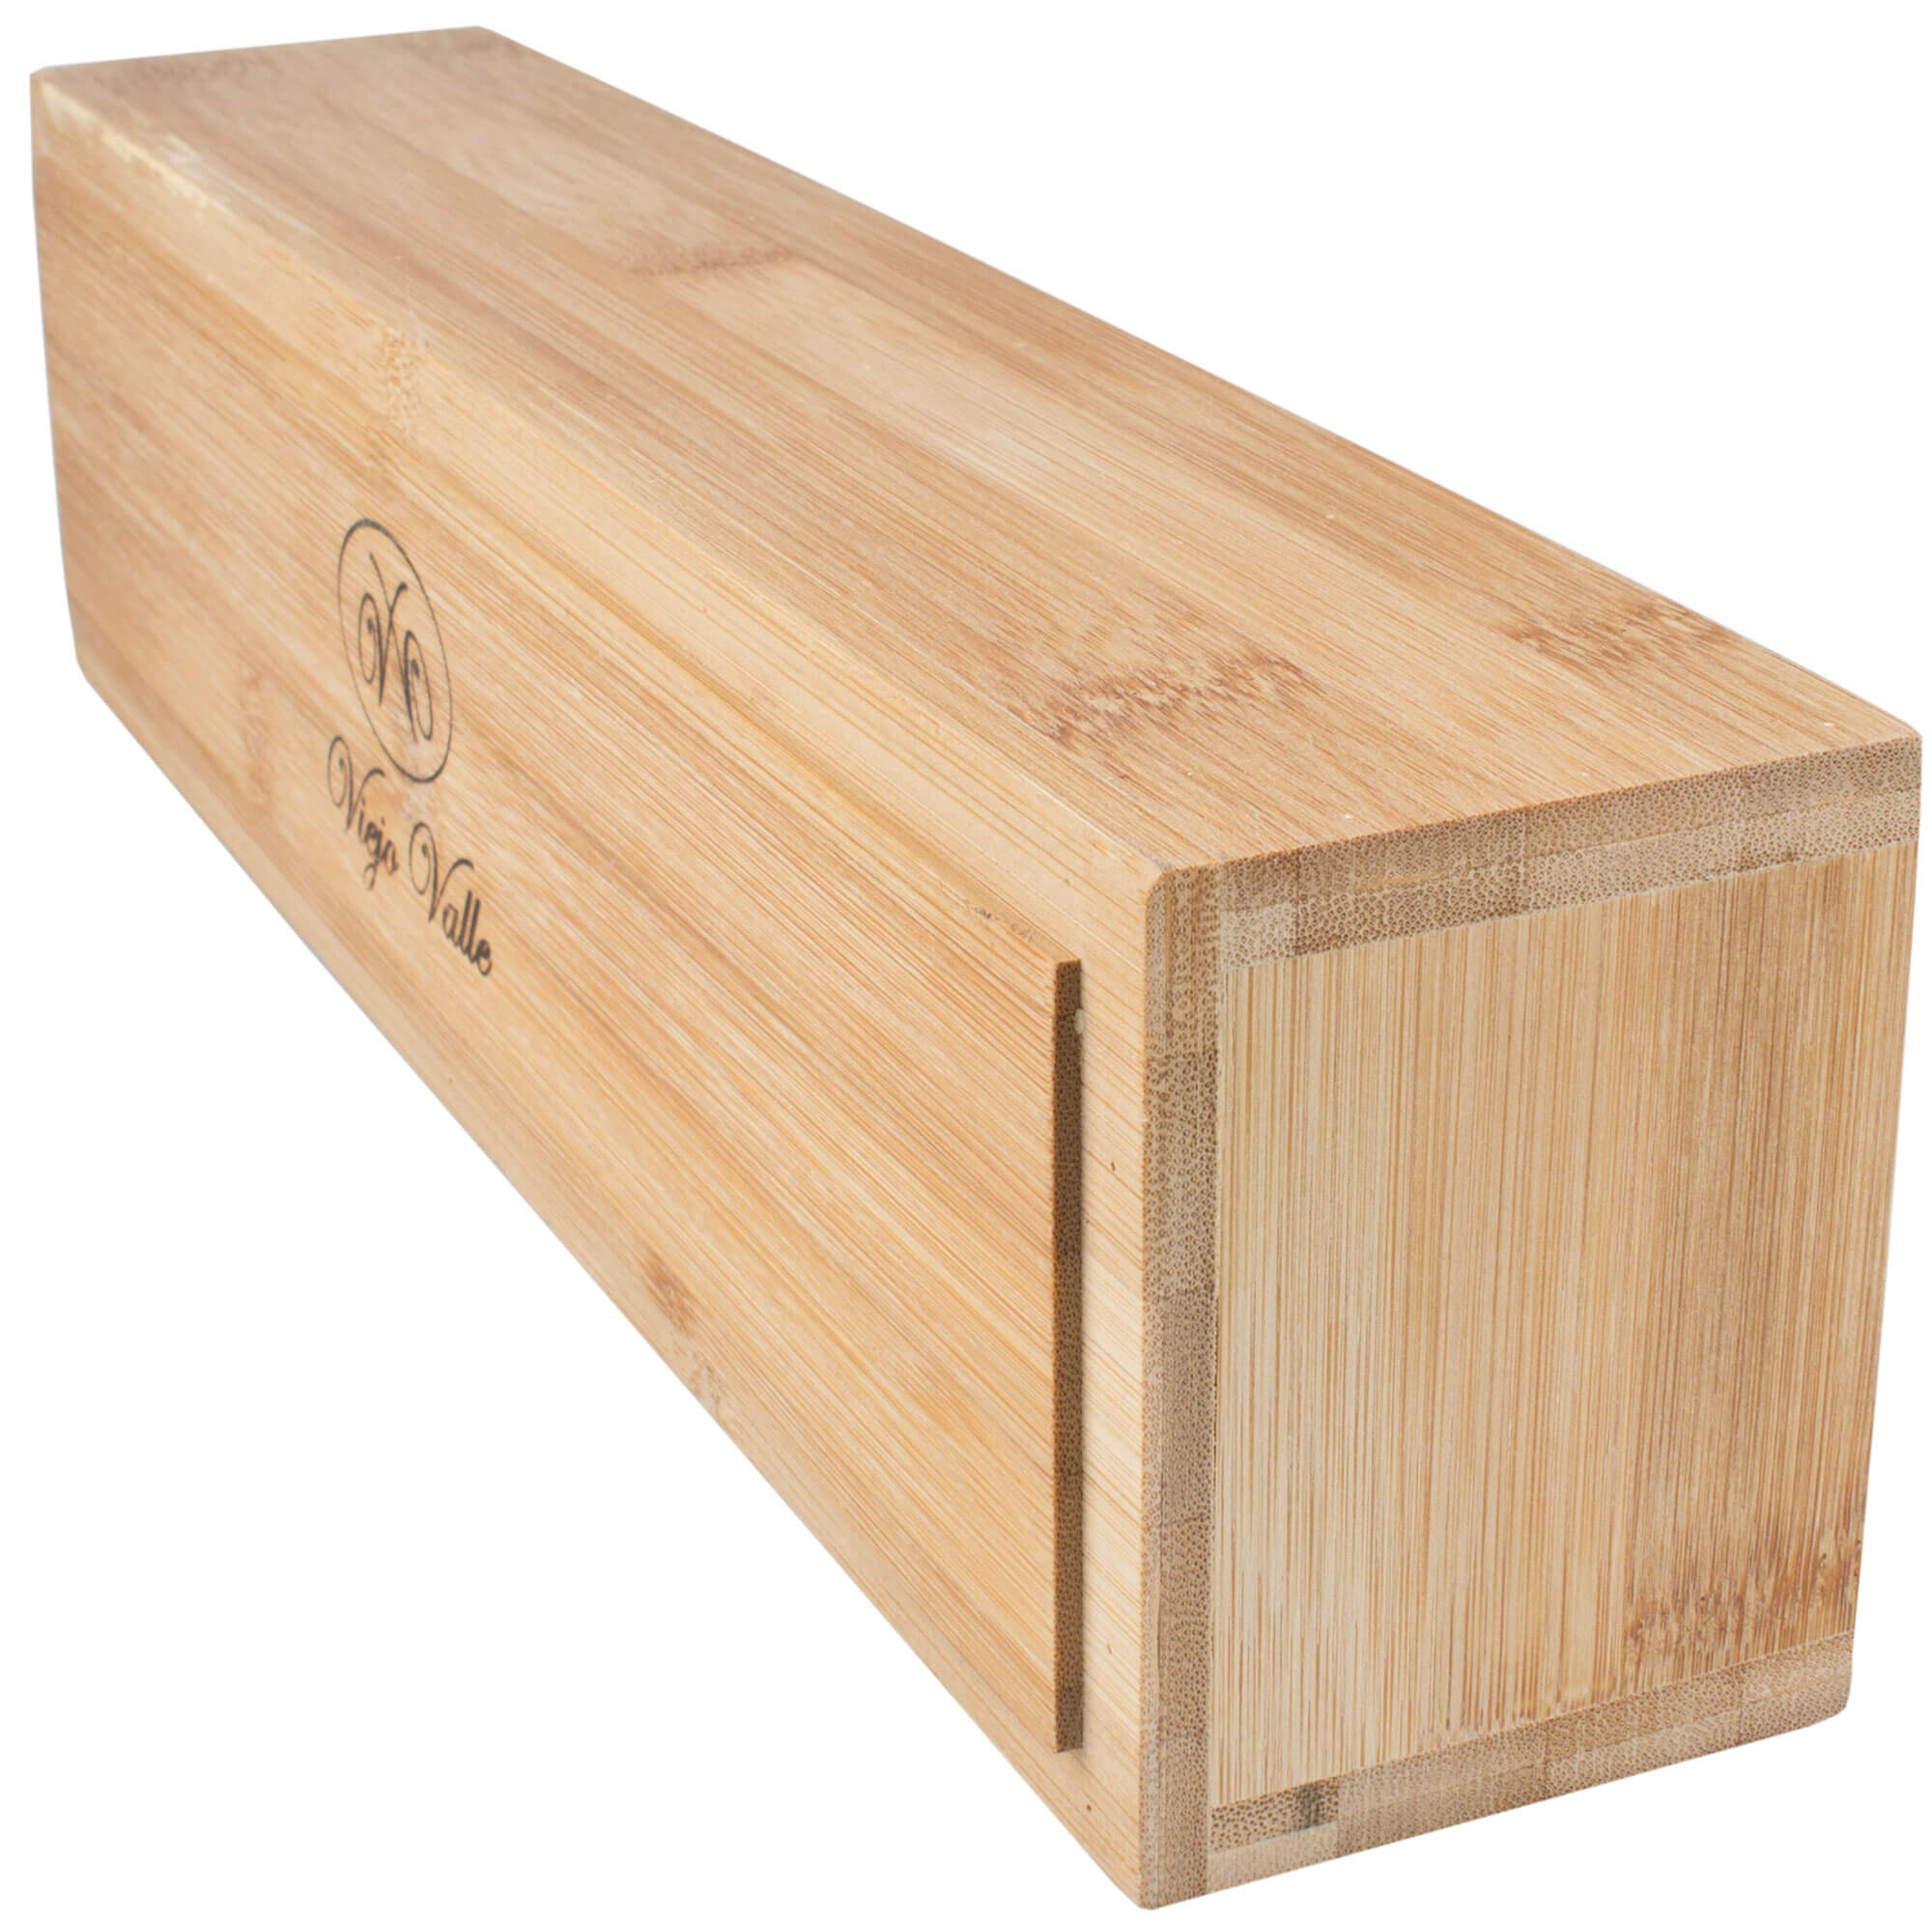 Bamboo box with compartments - 39x10x8cm